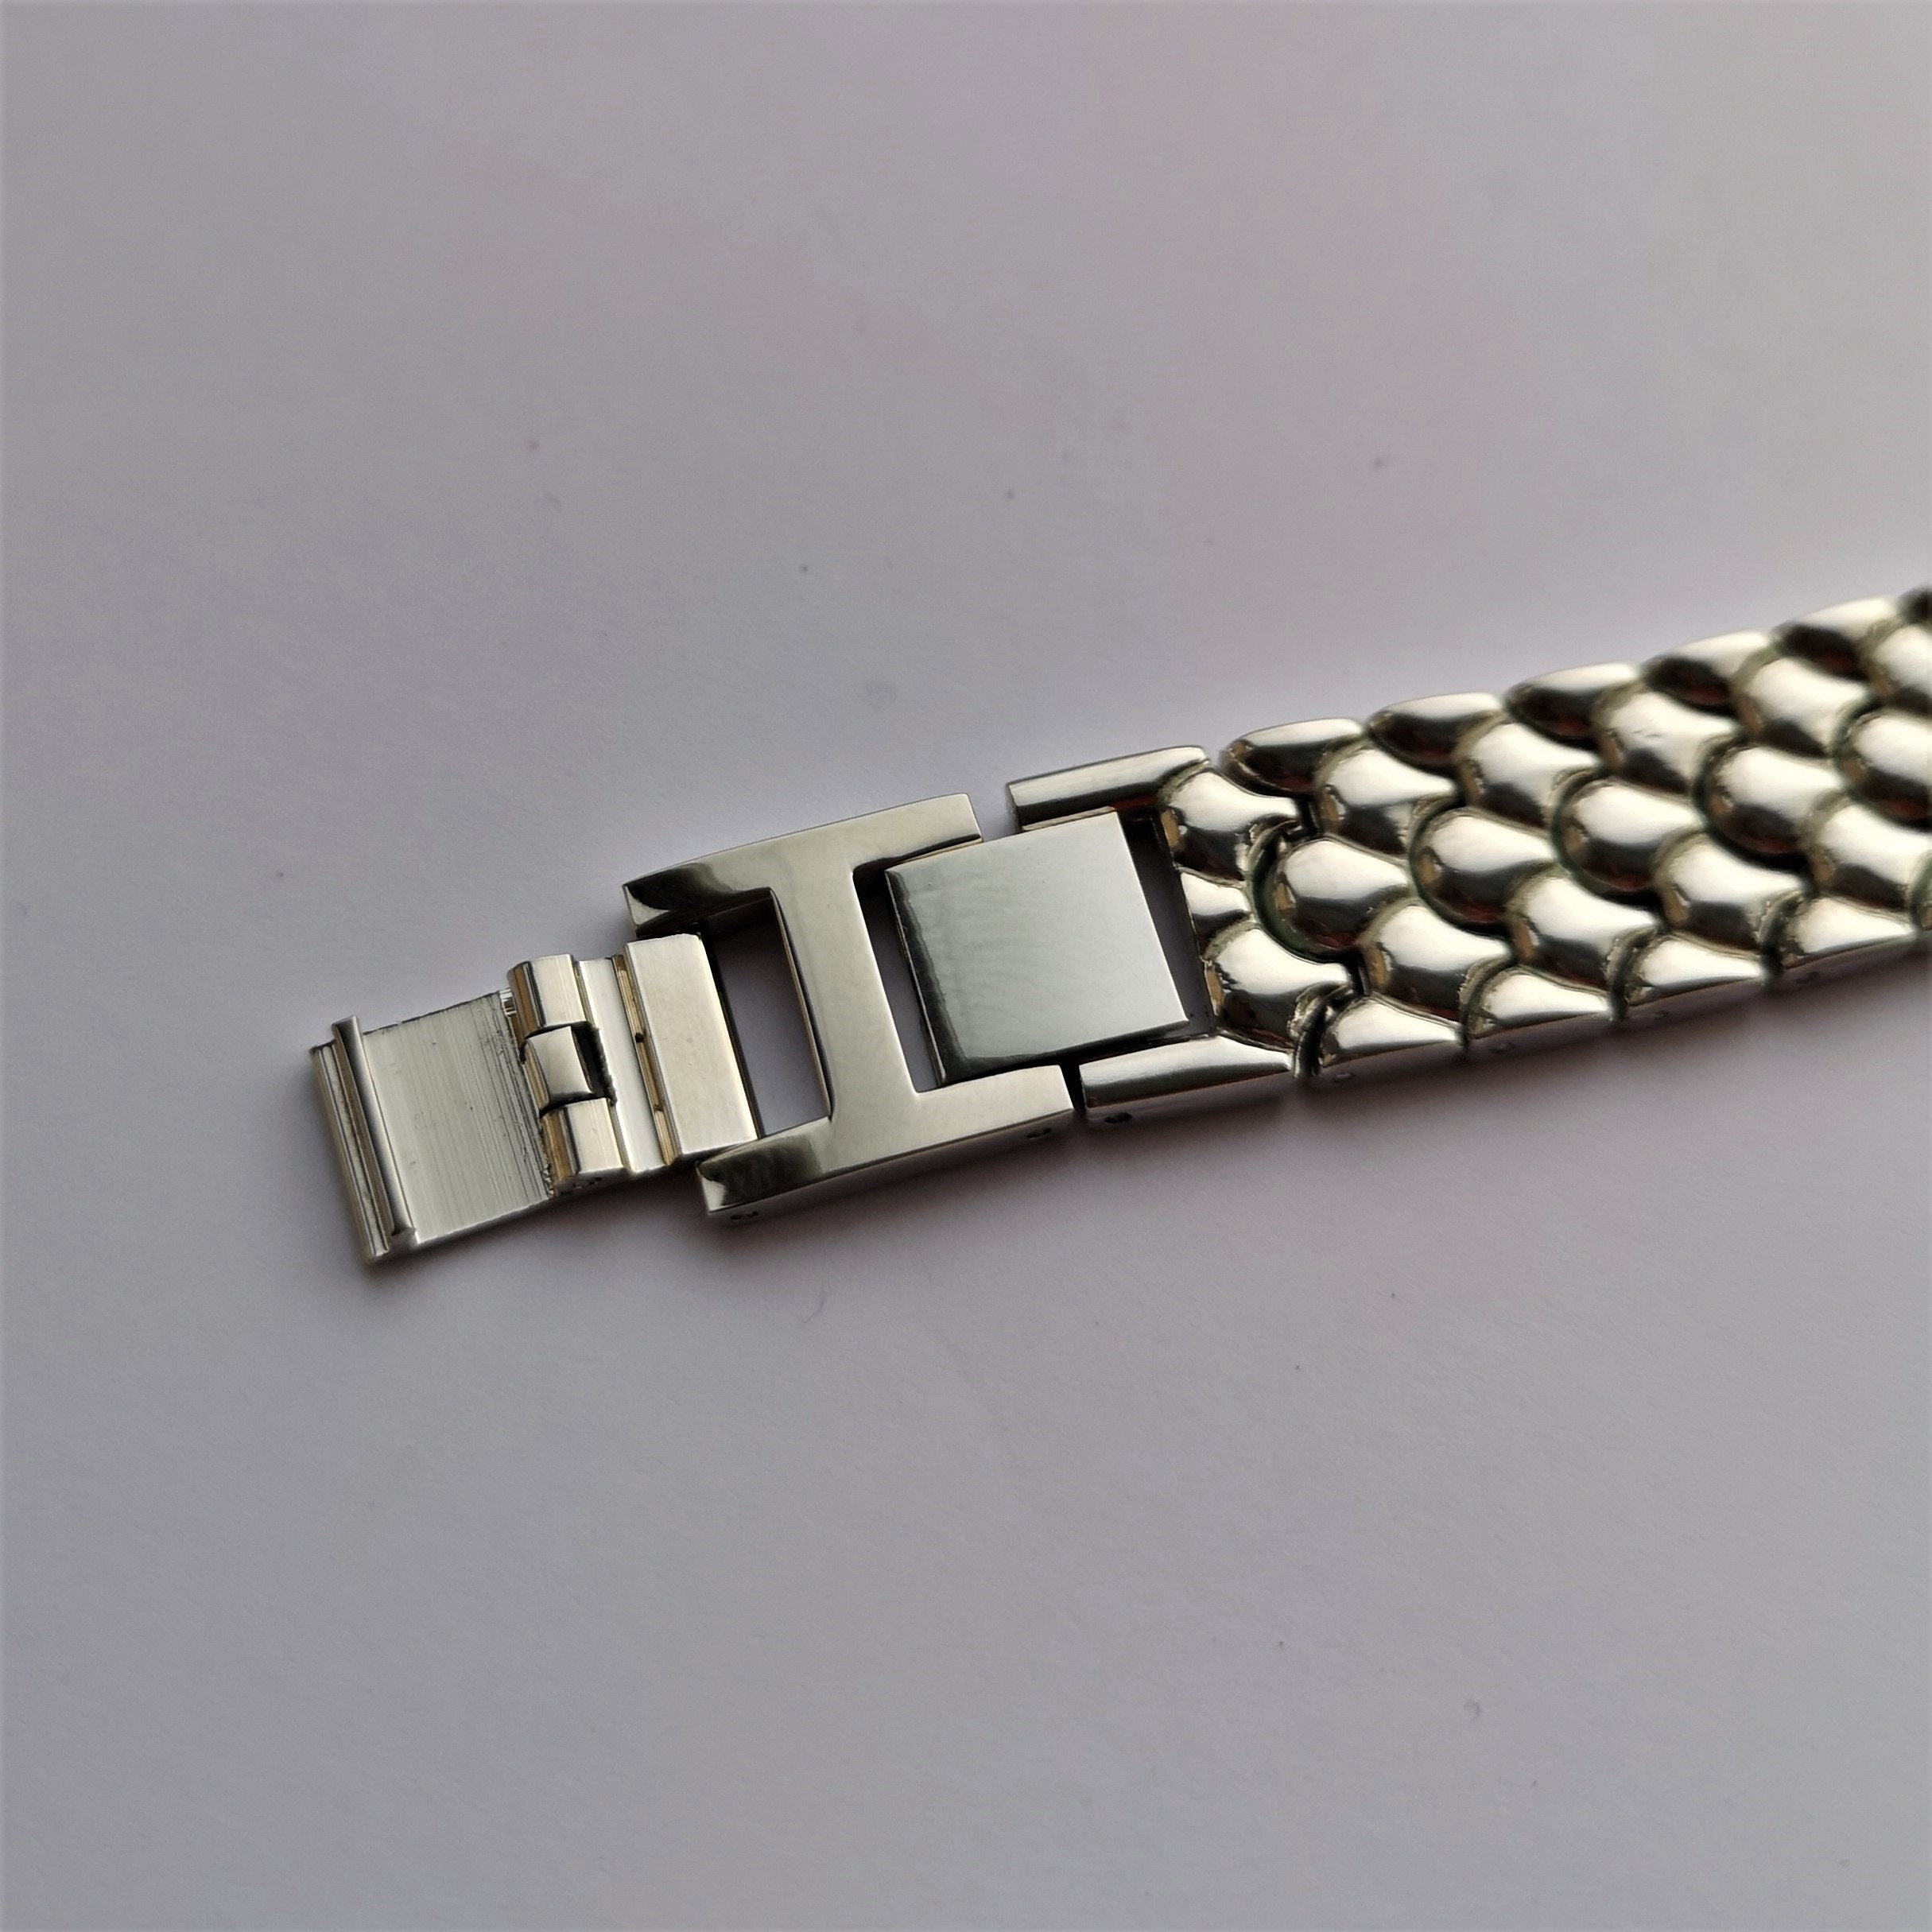 Watch Strap Extender 3mm / 4mm / 5mm for Wrist Watch Bracelet Extenders  Band Clasp With Fold Over Link Clasp -  Israel